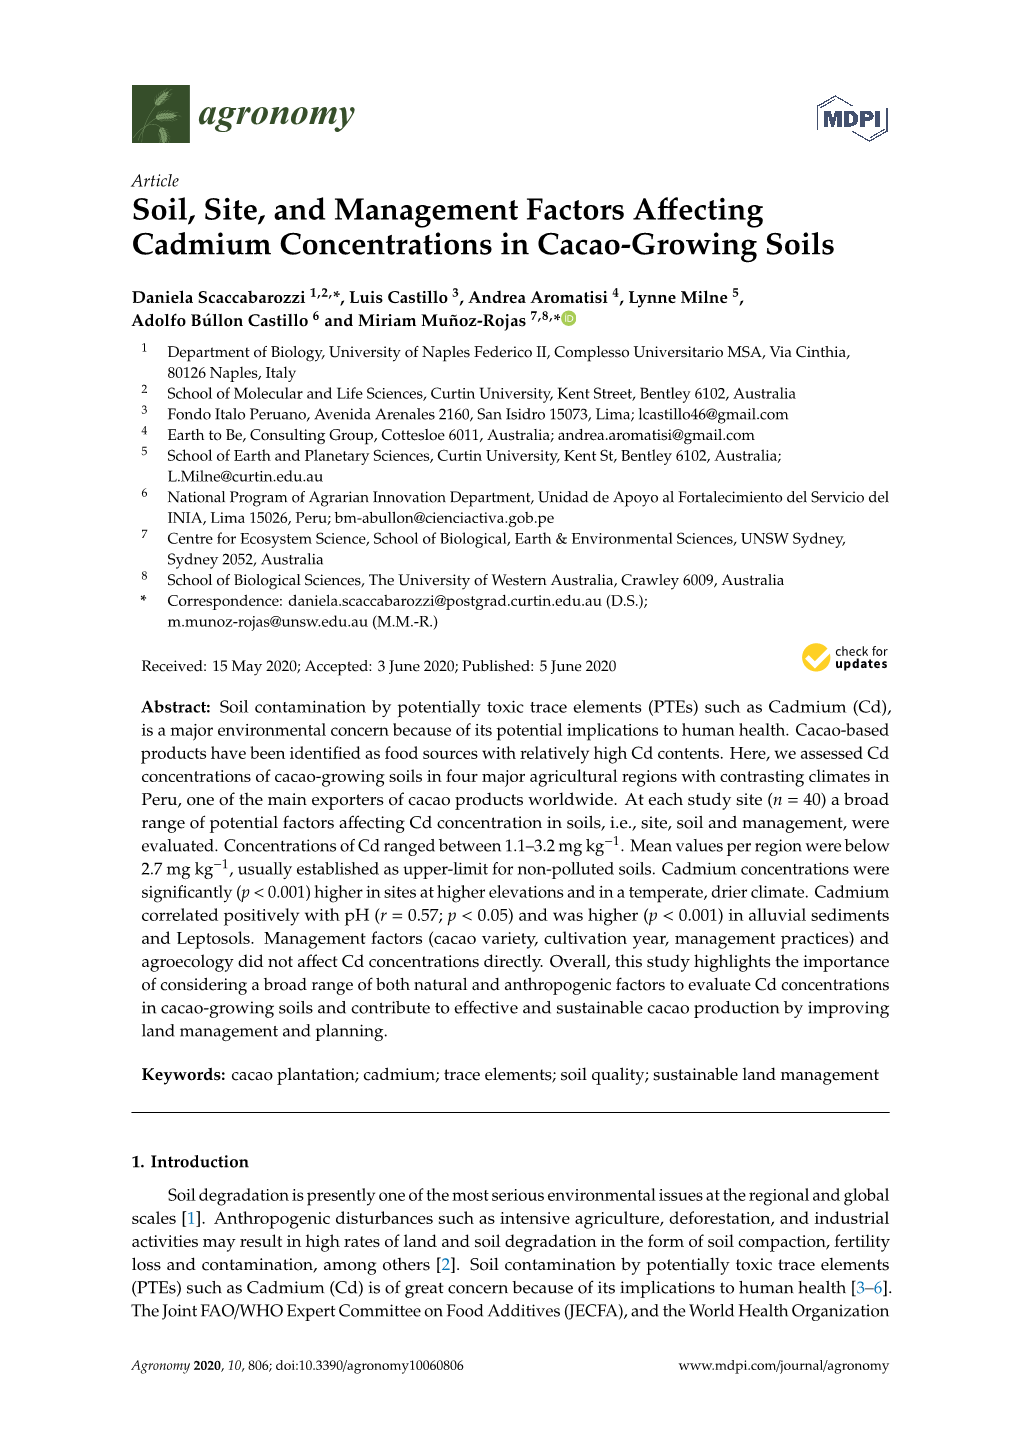 Soil, Site, and Management Factors Affecting Cadmium Concentrations in Cacao-Growing Soils